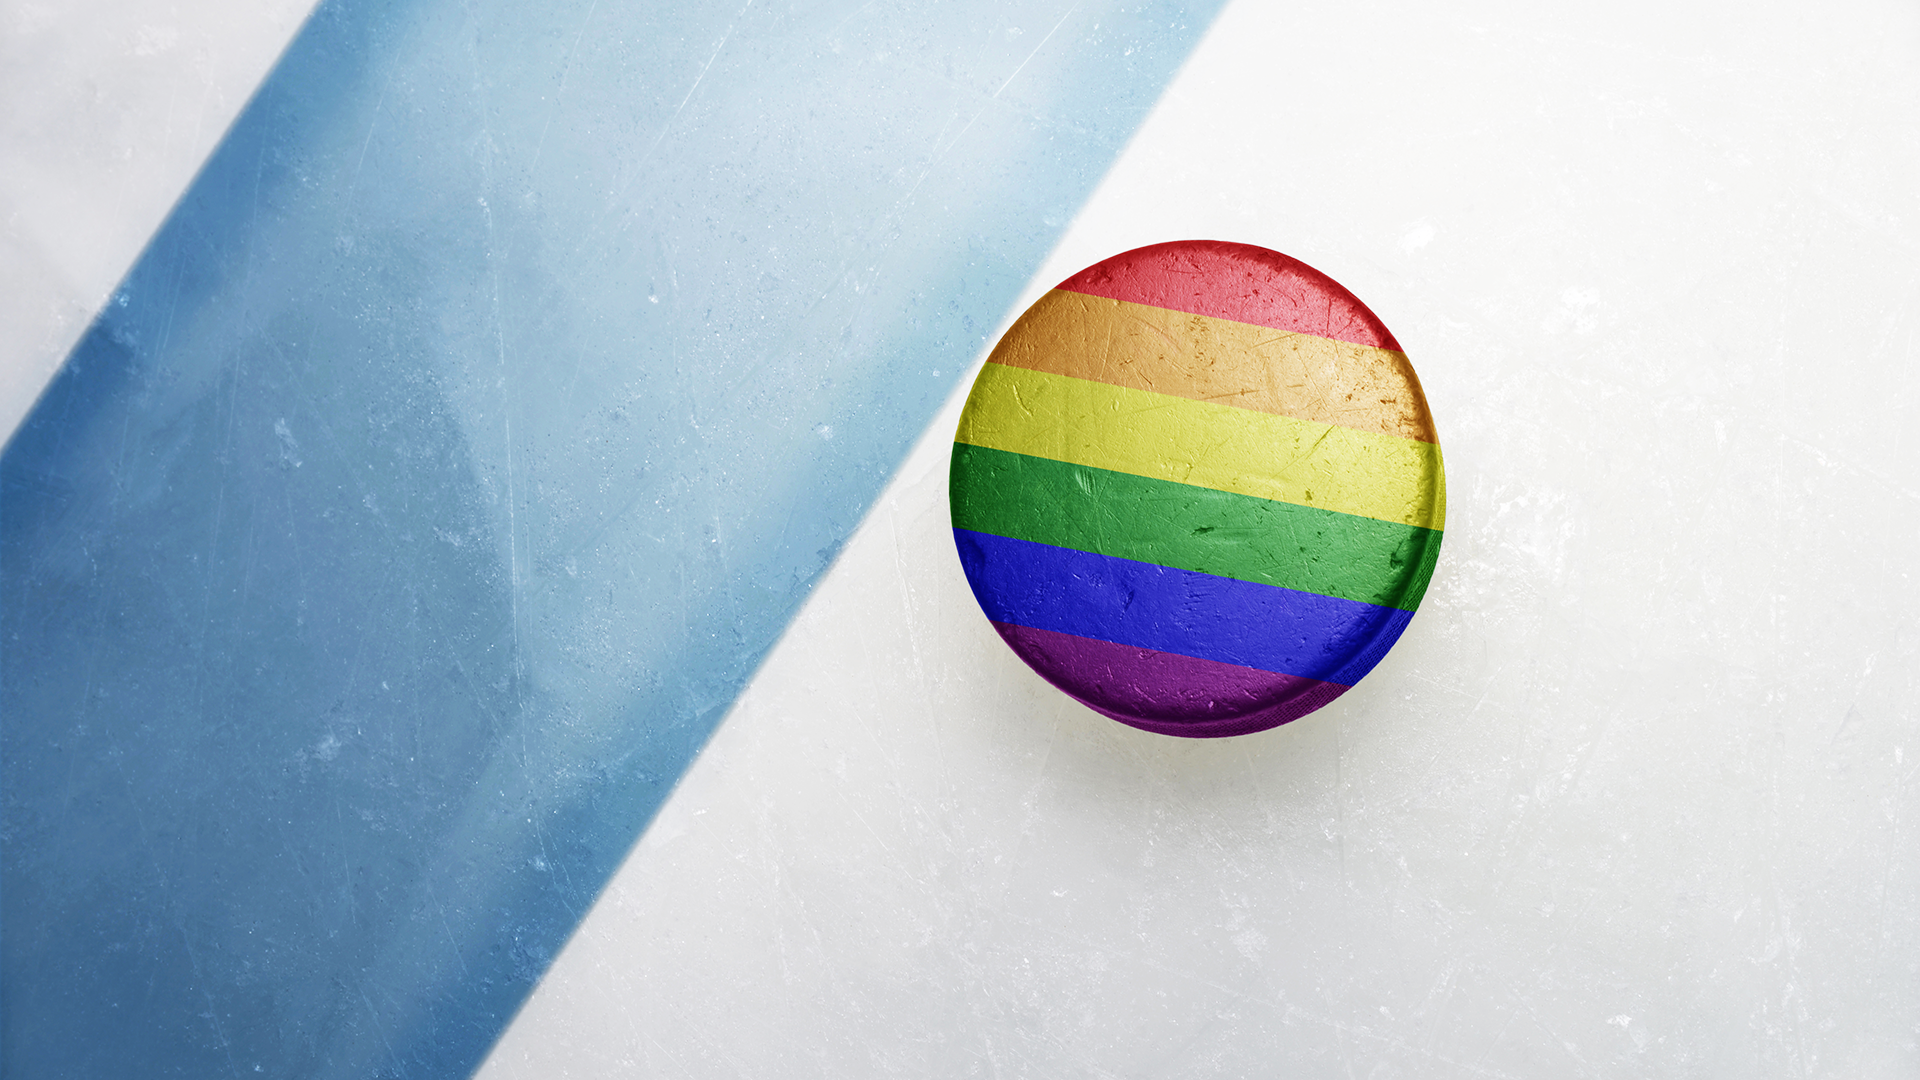 A hockey puck in the colors of the rainbow Pride flag sits on ice.